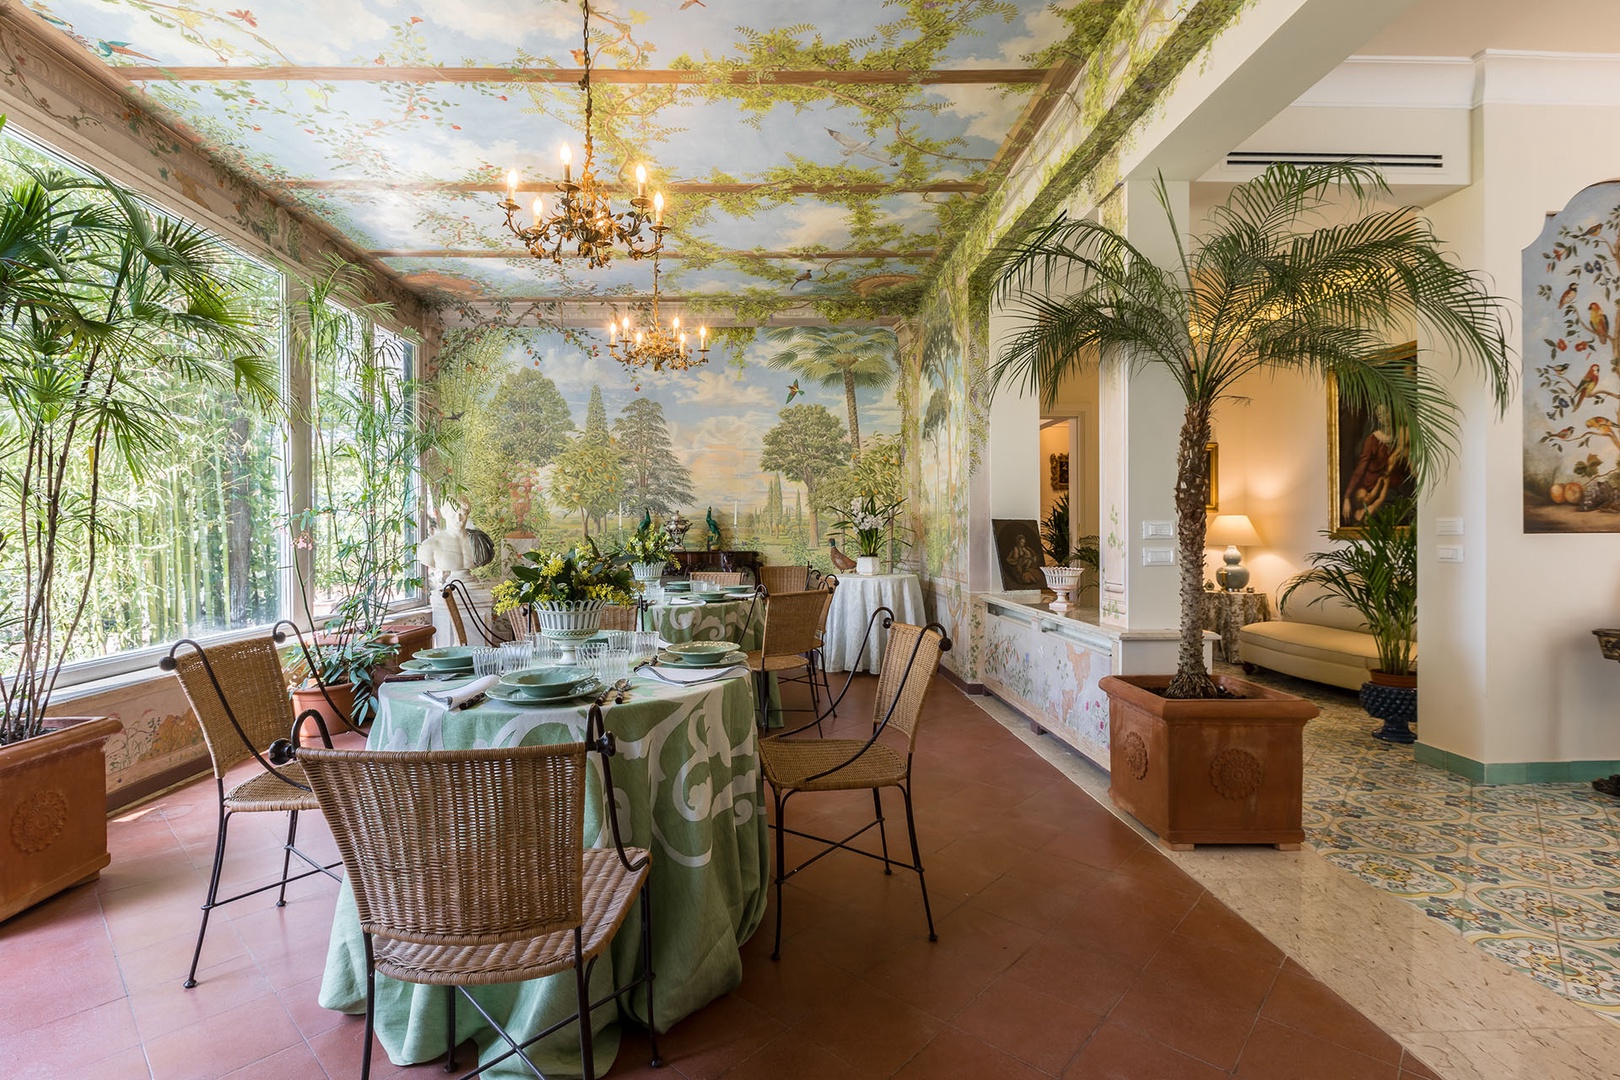 Large dining room brings the outdoors inside with lush greenery and tromp l'oeil imagery.